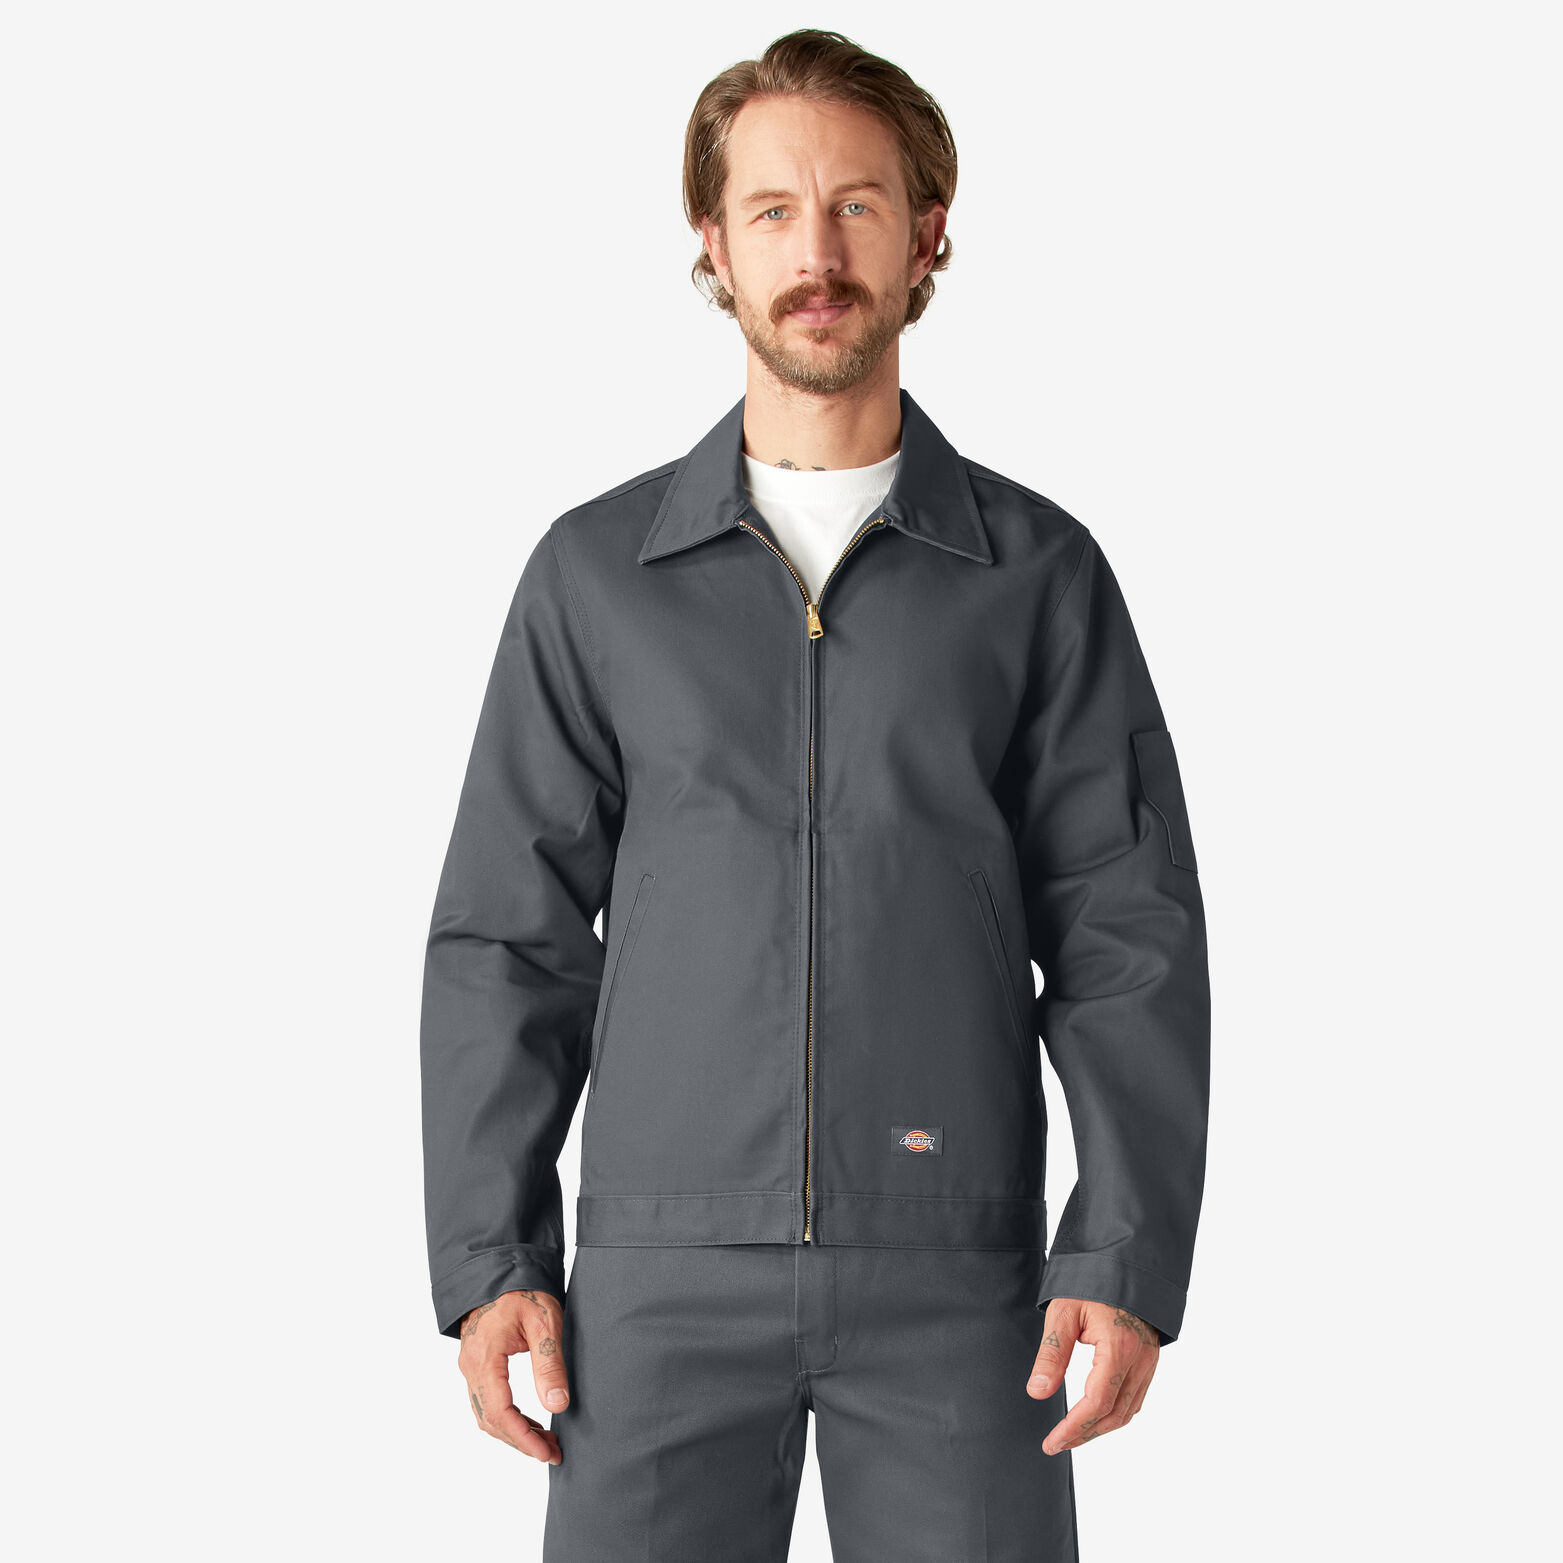 Unlined Eisenhower Jacket For Men Charcoal Gray | Dickies